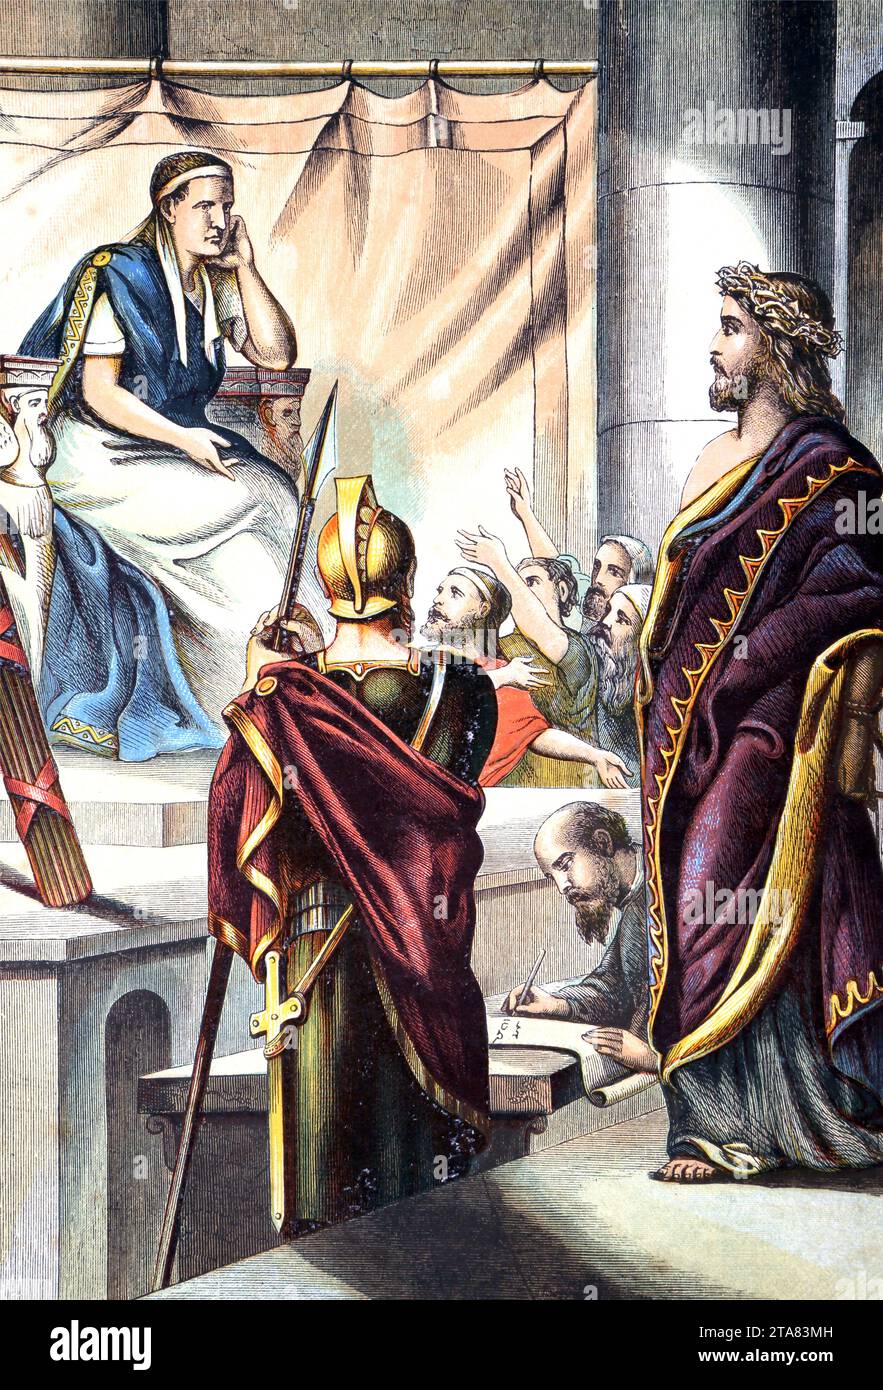 Illustration of Jesus Christ wearing the Crown of thorns with Pontius Pilate  (Pilate's Court) Gospel of John New Testament Stock Photo